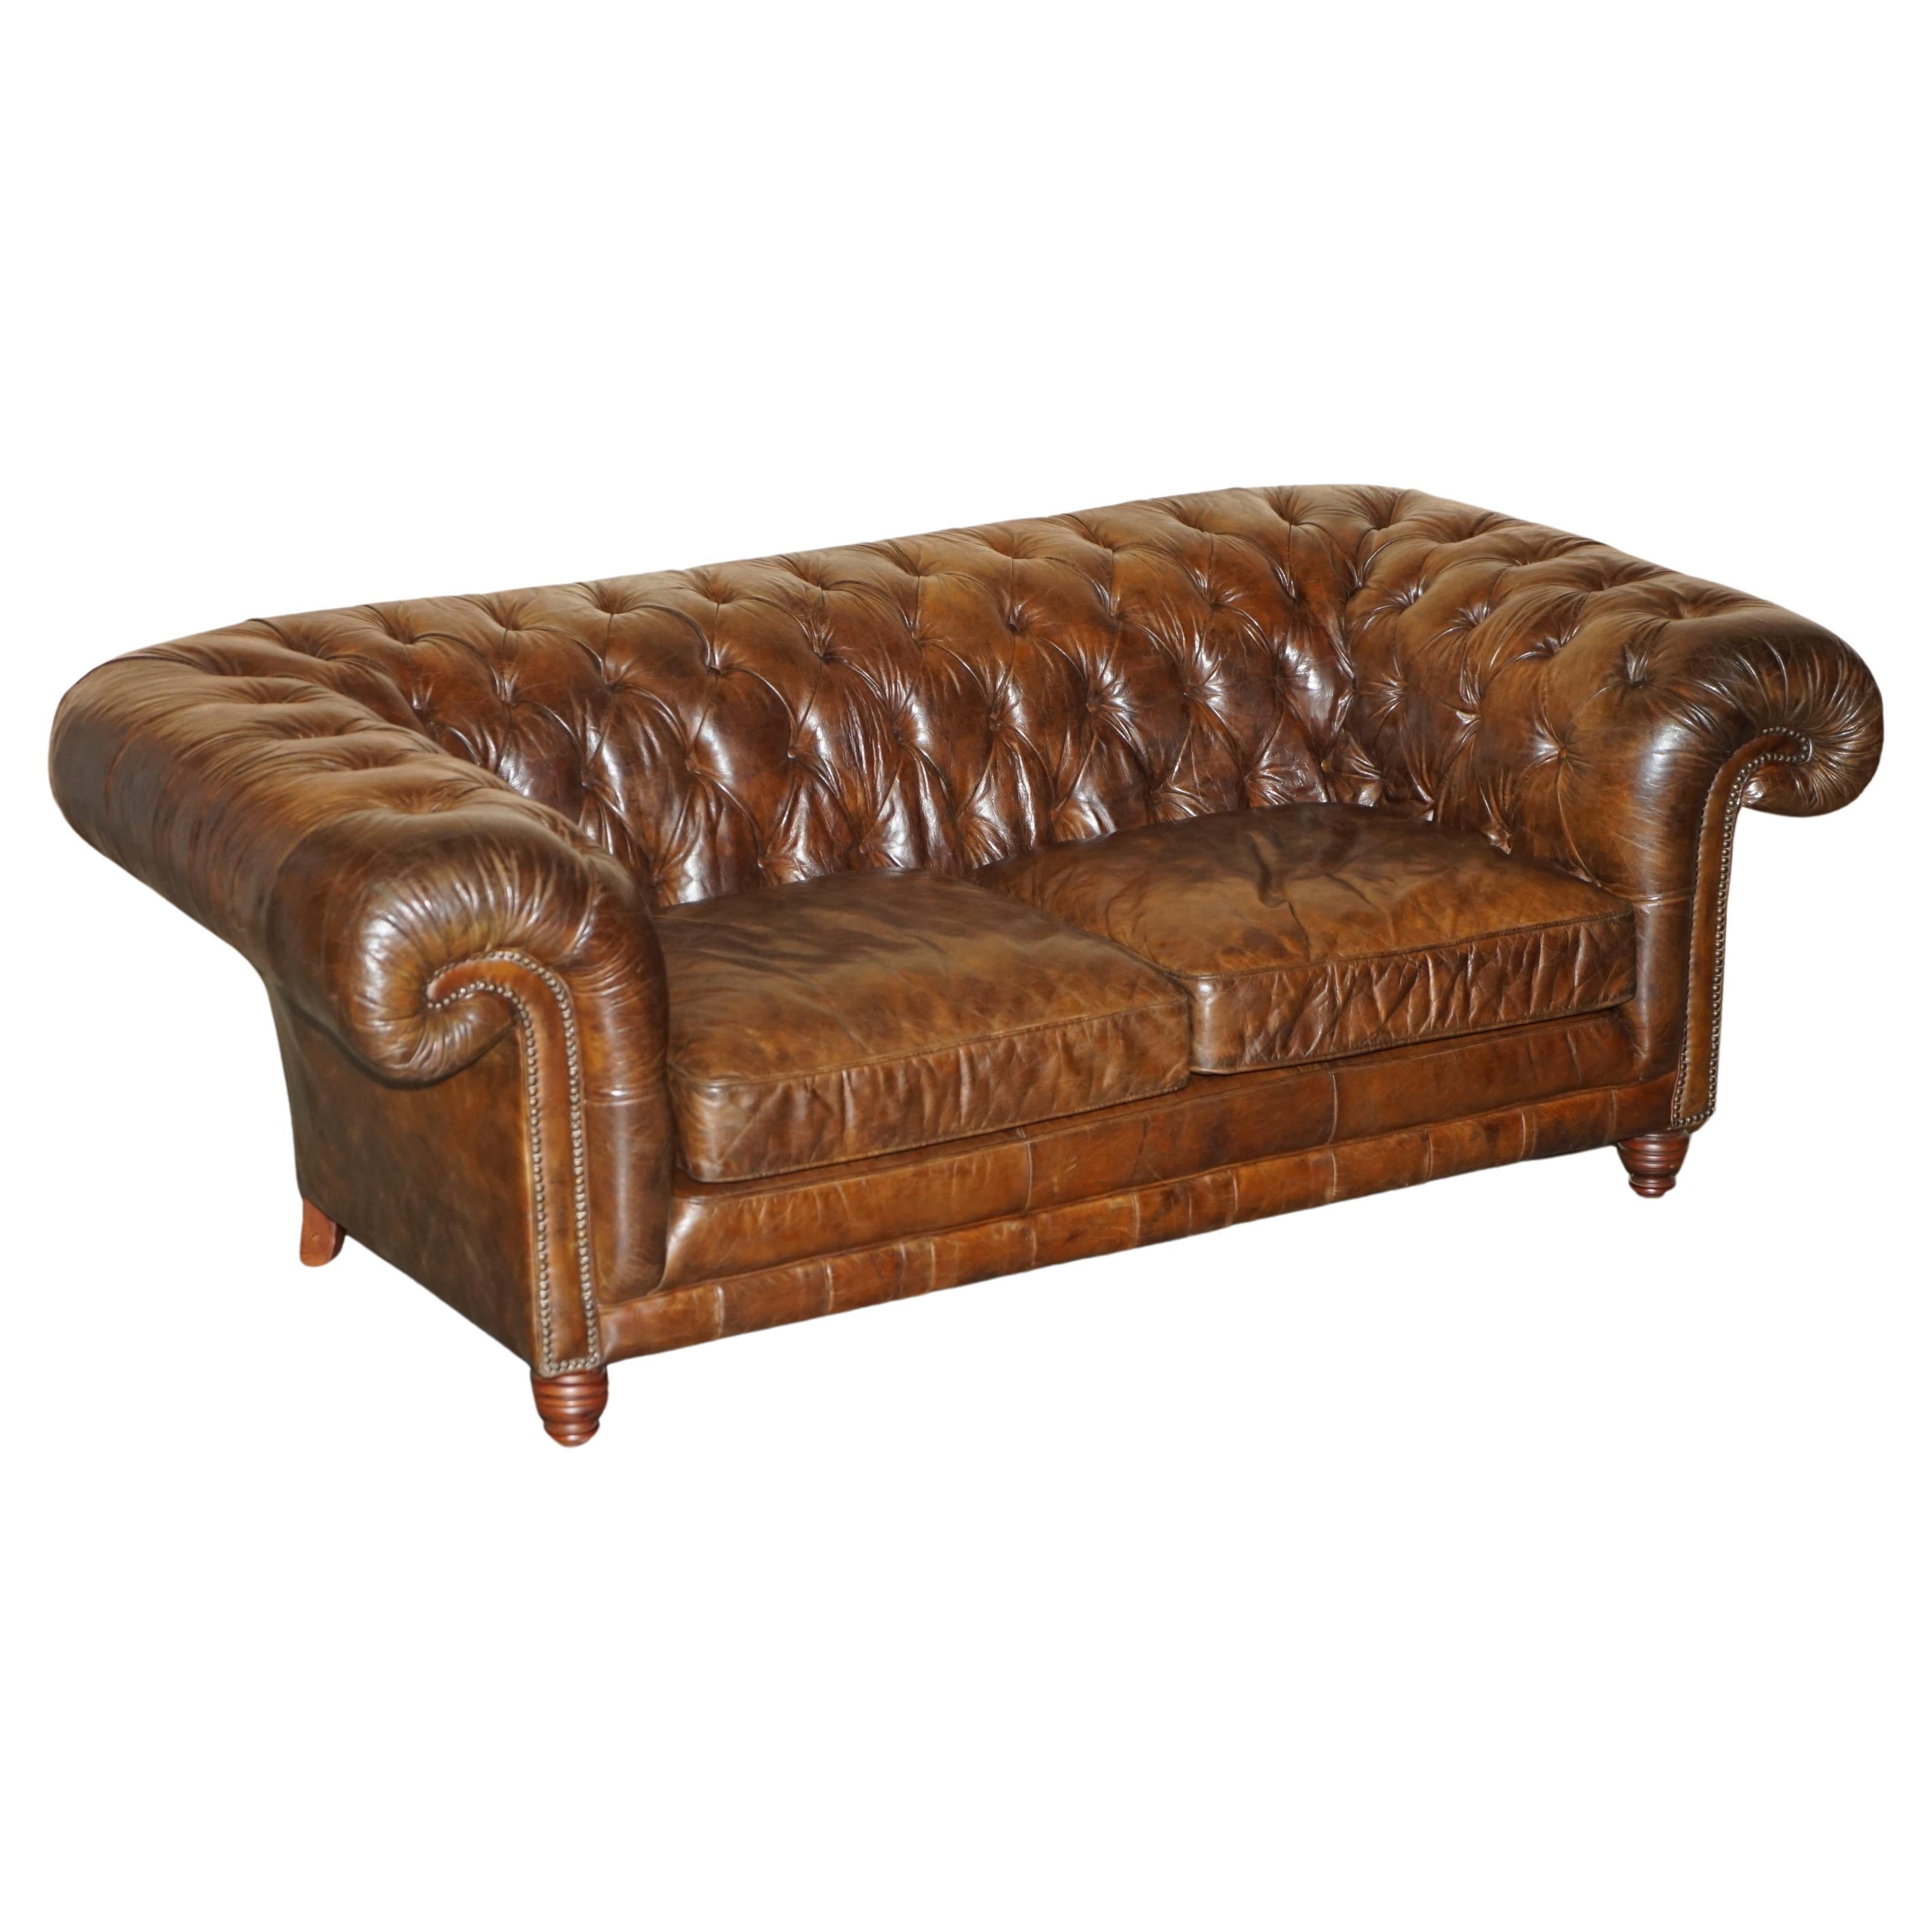 1 OF 2 TIMOTHY OULTON HERiTAGE BROWN VINTAGE LEATHER CHESTERFIELD HALO SOFAS For Sale